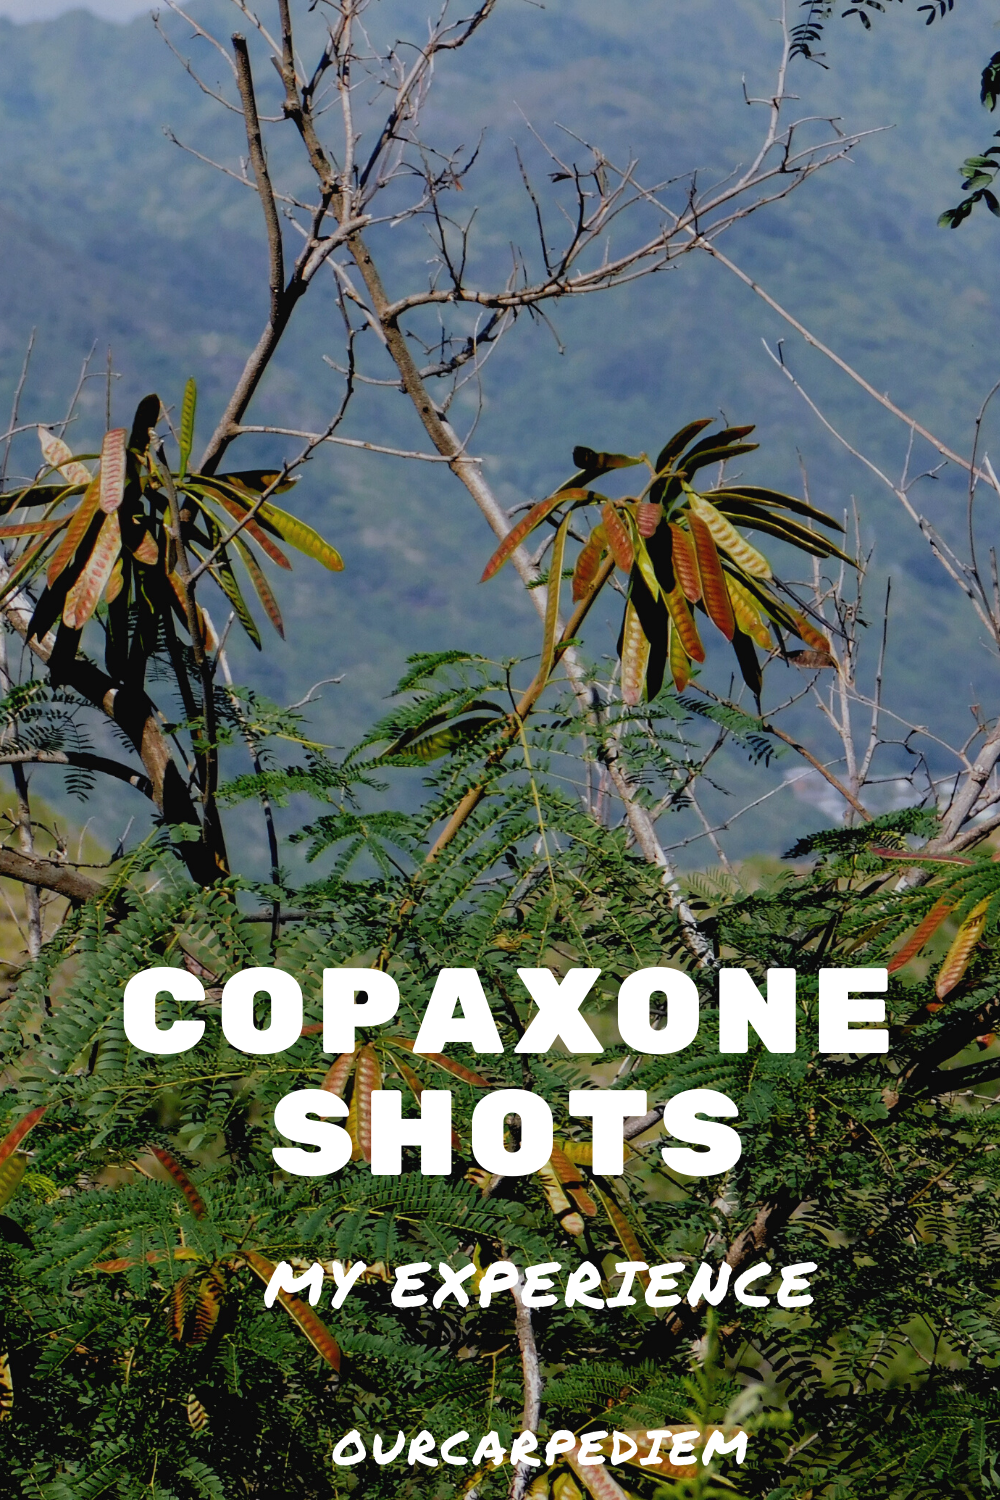 A long-time MS-warrior shares her experience with Copaxone shots. If you are worried about these shots, check out this article. It also covers why I stopped using #Copaxone for my multiple sclerosis and started using Gilenya. | Disease Modifying Medication | self-inject | afraid of needles | #MSwarrior #MSstrong #OurCarpeDiem #MultipleSclerosis #MS #ChronicIllness #LifeWithMS #spoonies